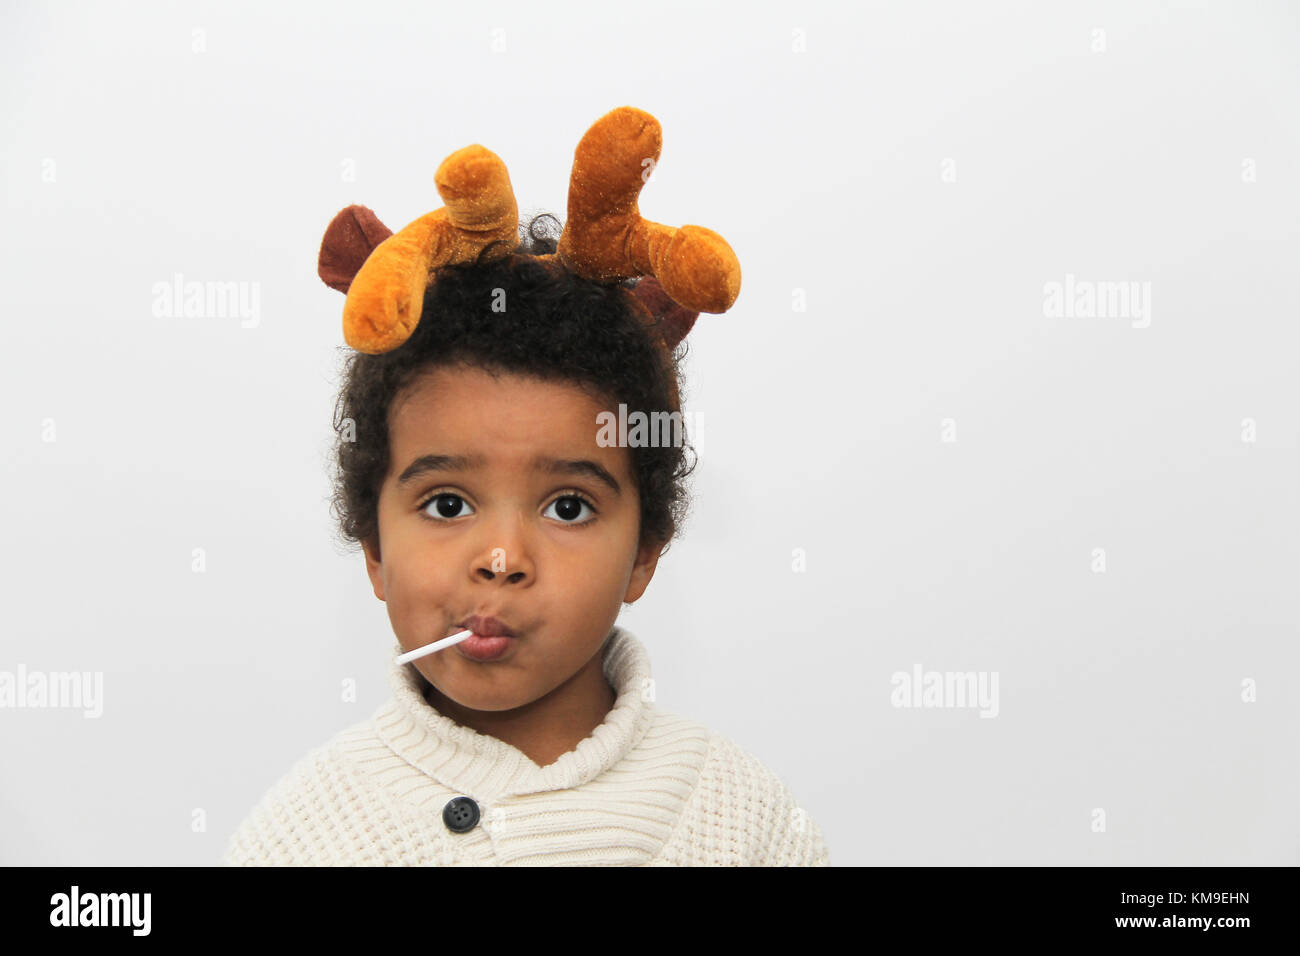 Portrait of a smiling boy wearing Christmas antlers eating a lollipop Stock Photo